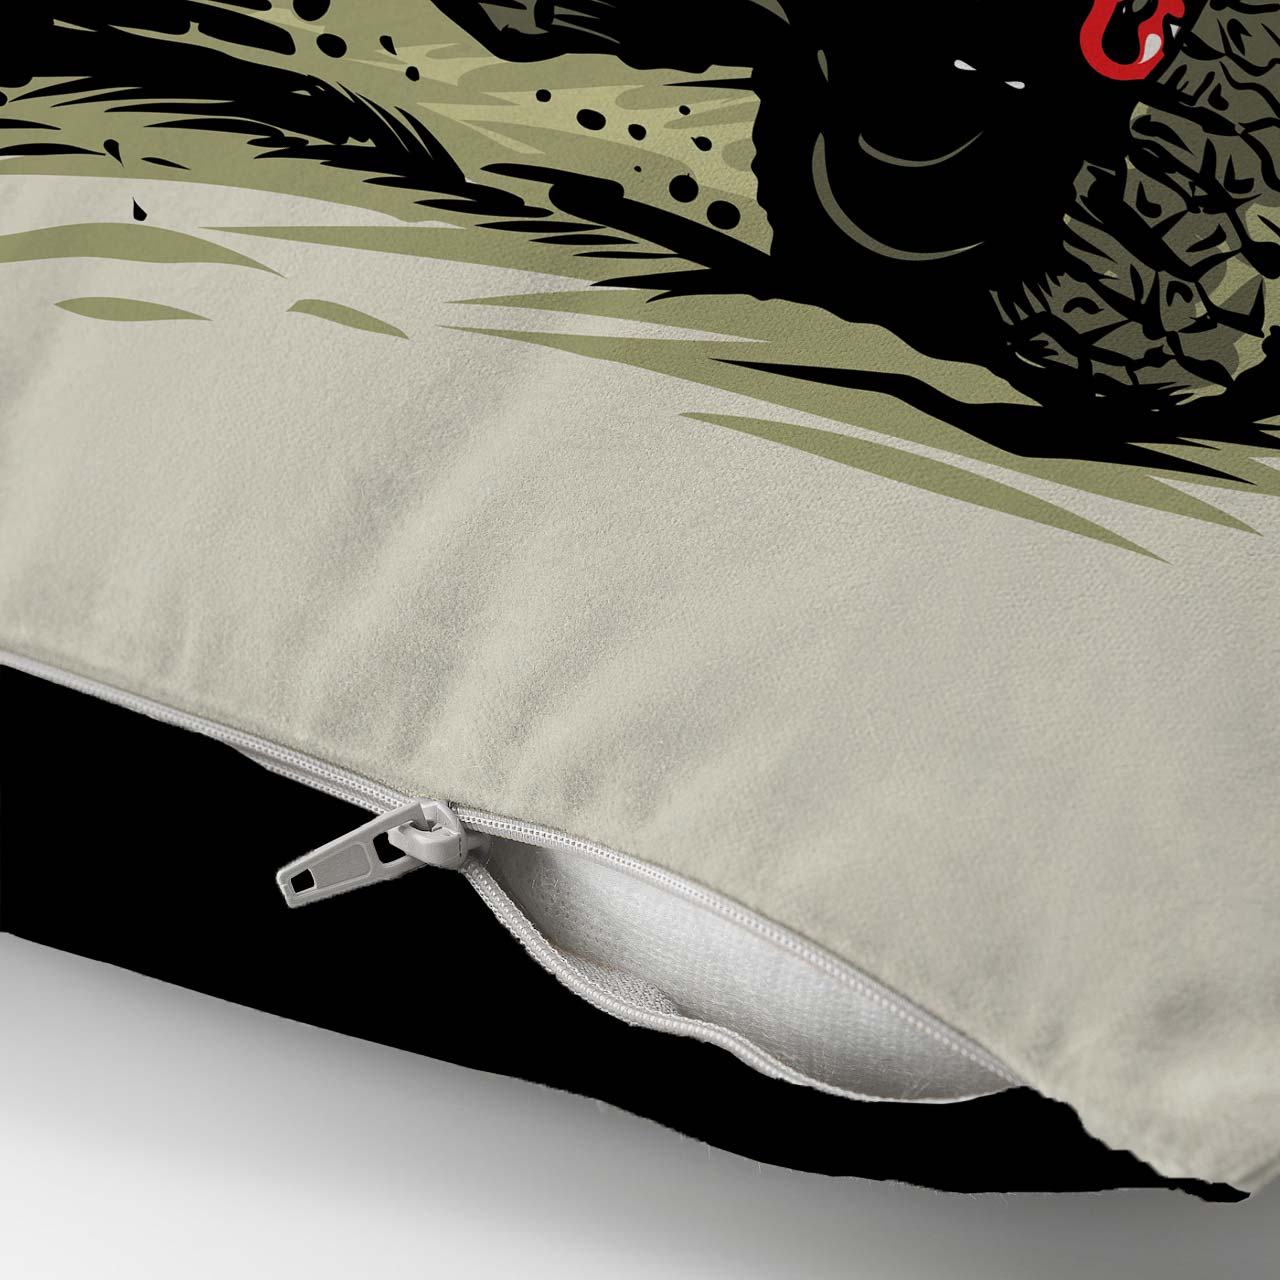 Off Road Adventure Cushion Cover trendy home